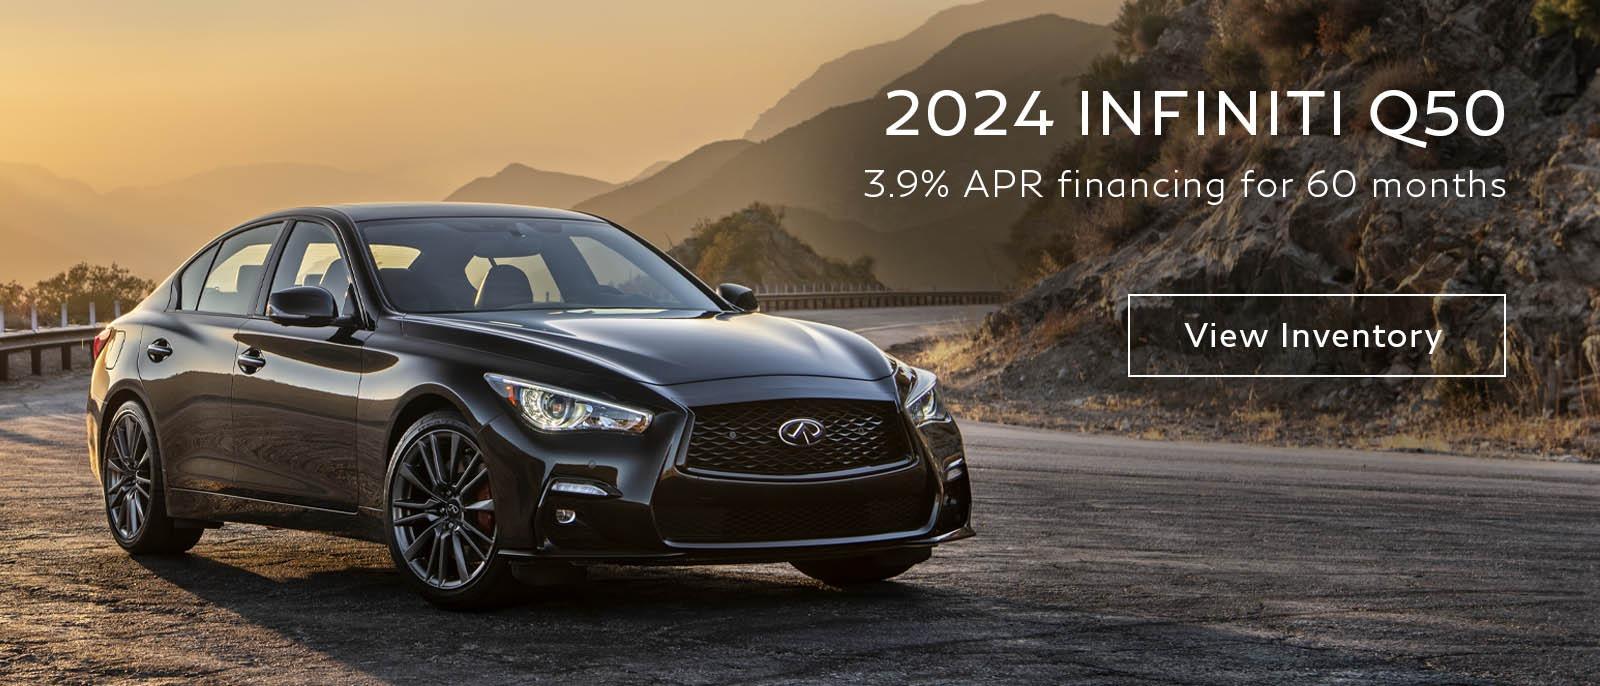 3.9% APR for 60 months on 2024 Q50